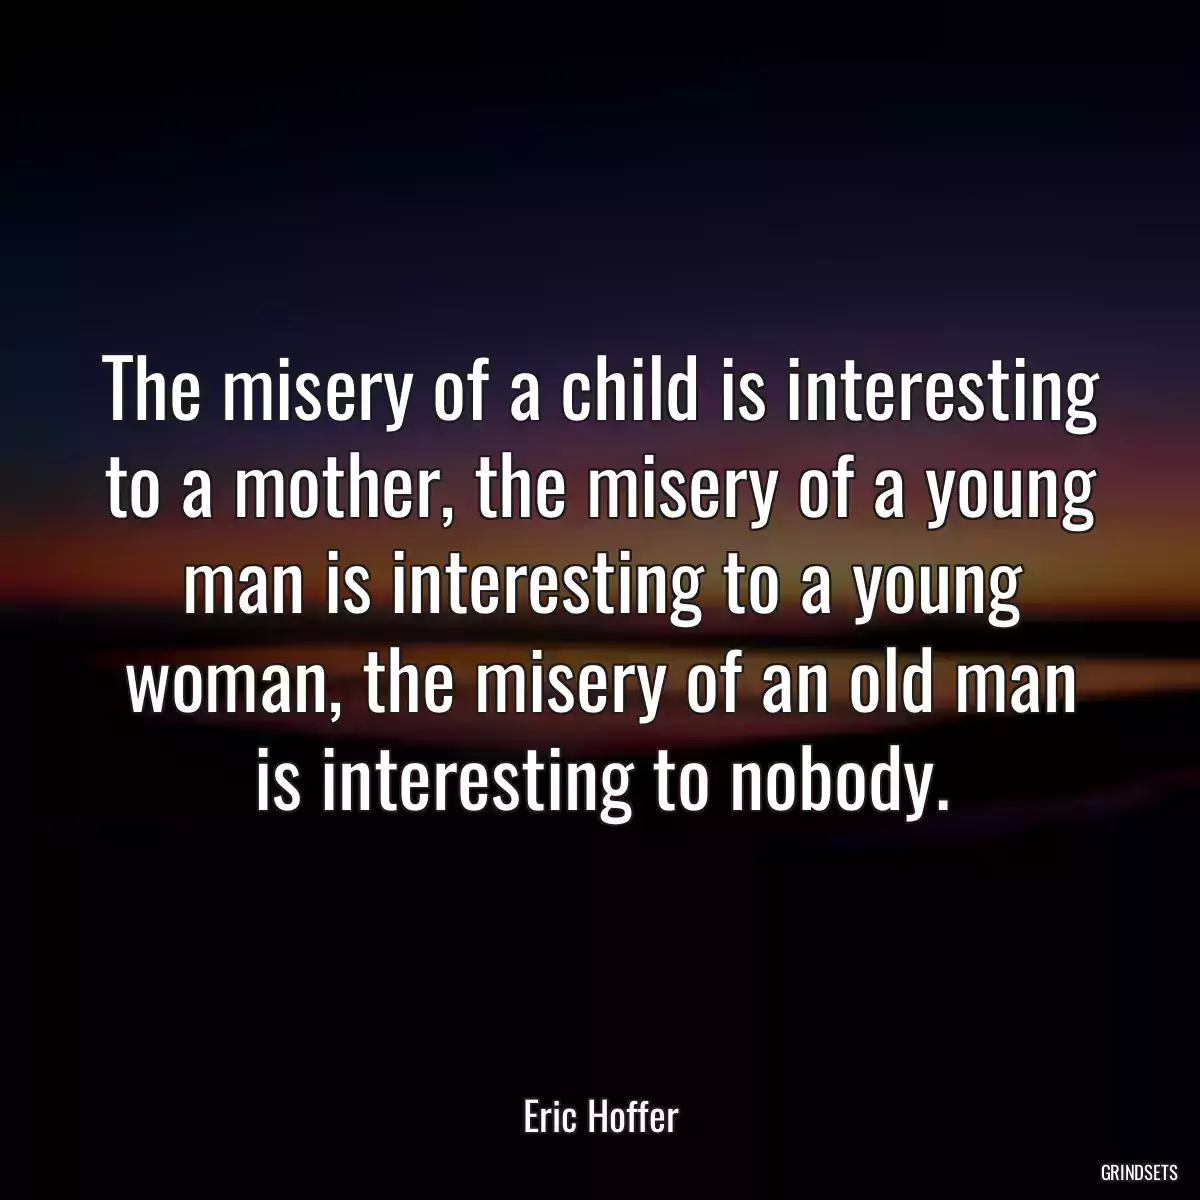 The misery of a child is interesting to a mother, the misery of a young man is interesting to a young woman, the misery of an old man is interesting to nobody.